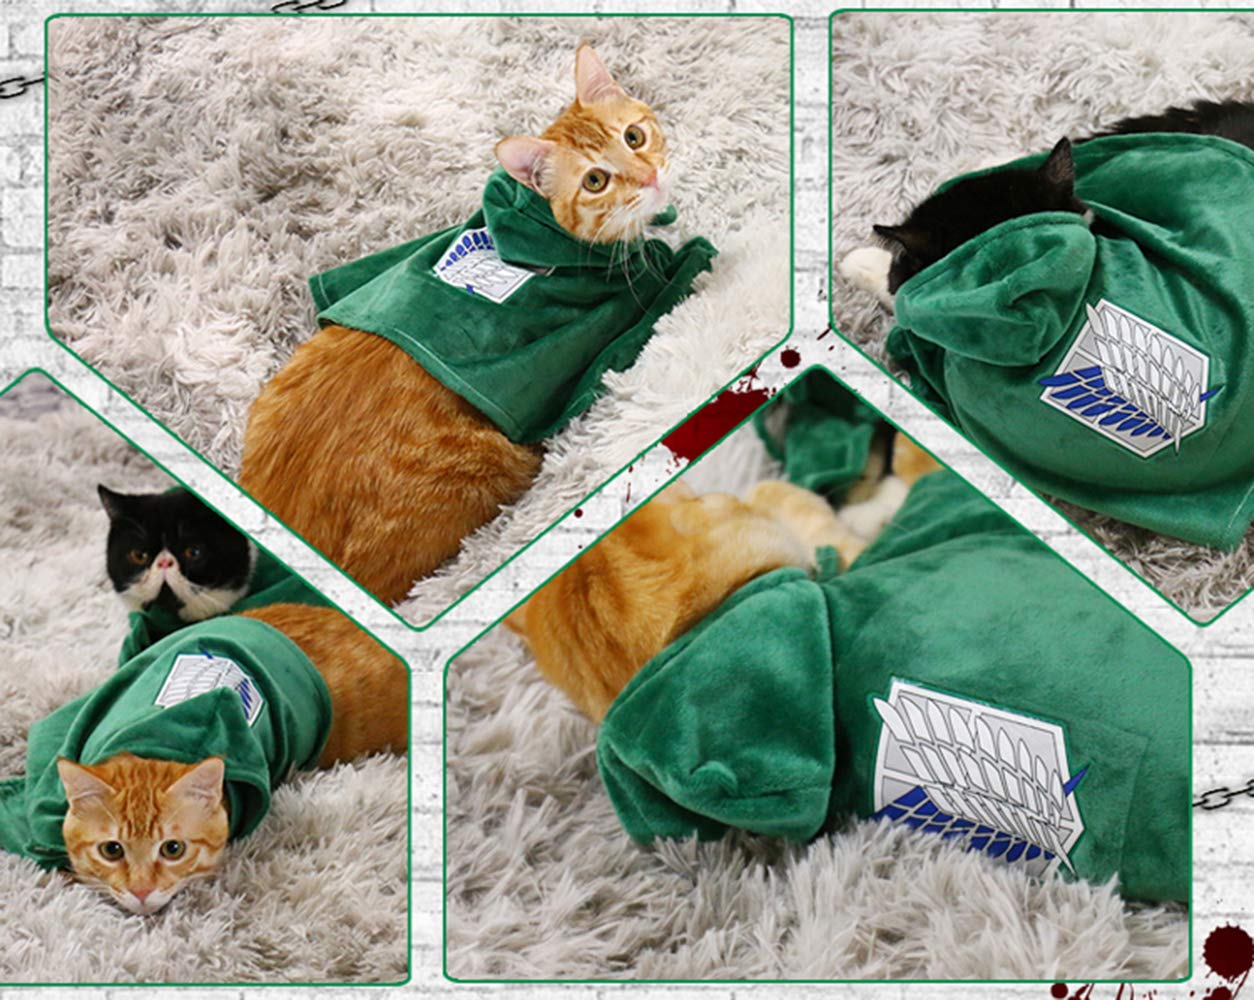 Different Animes Themed Cloaks for your Pet (6 Designs) Cosplay & Accessories